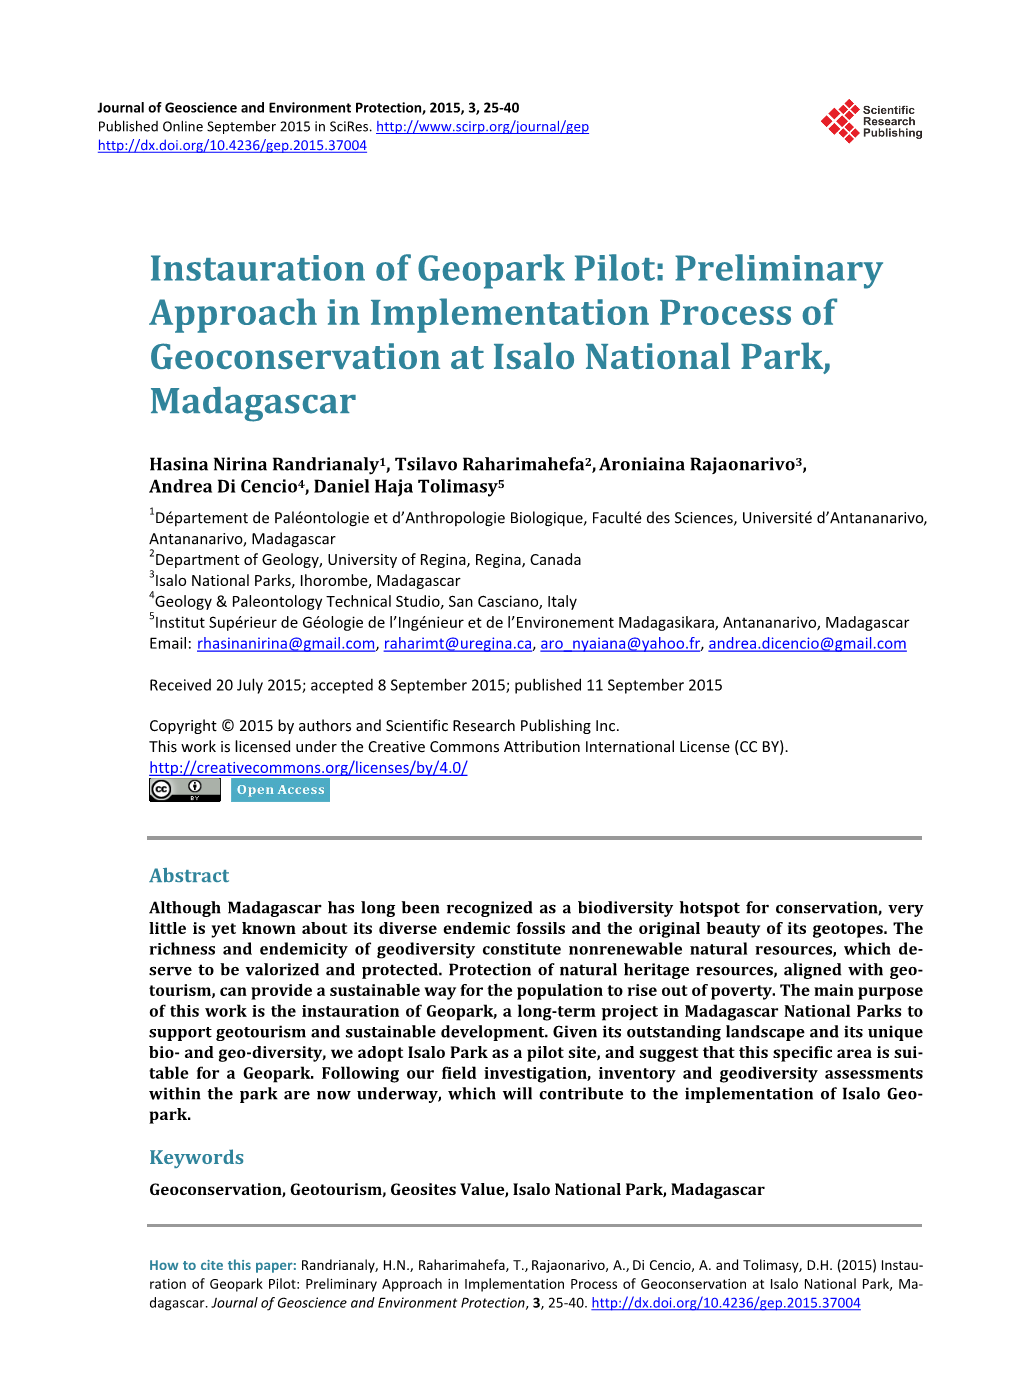 Preliminary Approach in Implementation Process of Geoconservation at Isalo National Park, Madagascar